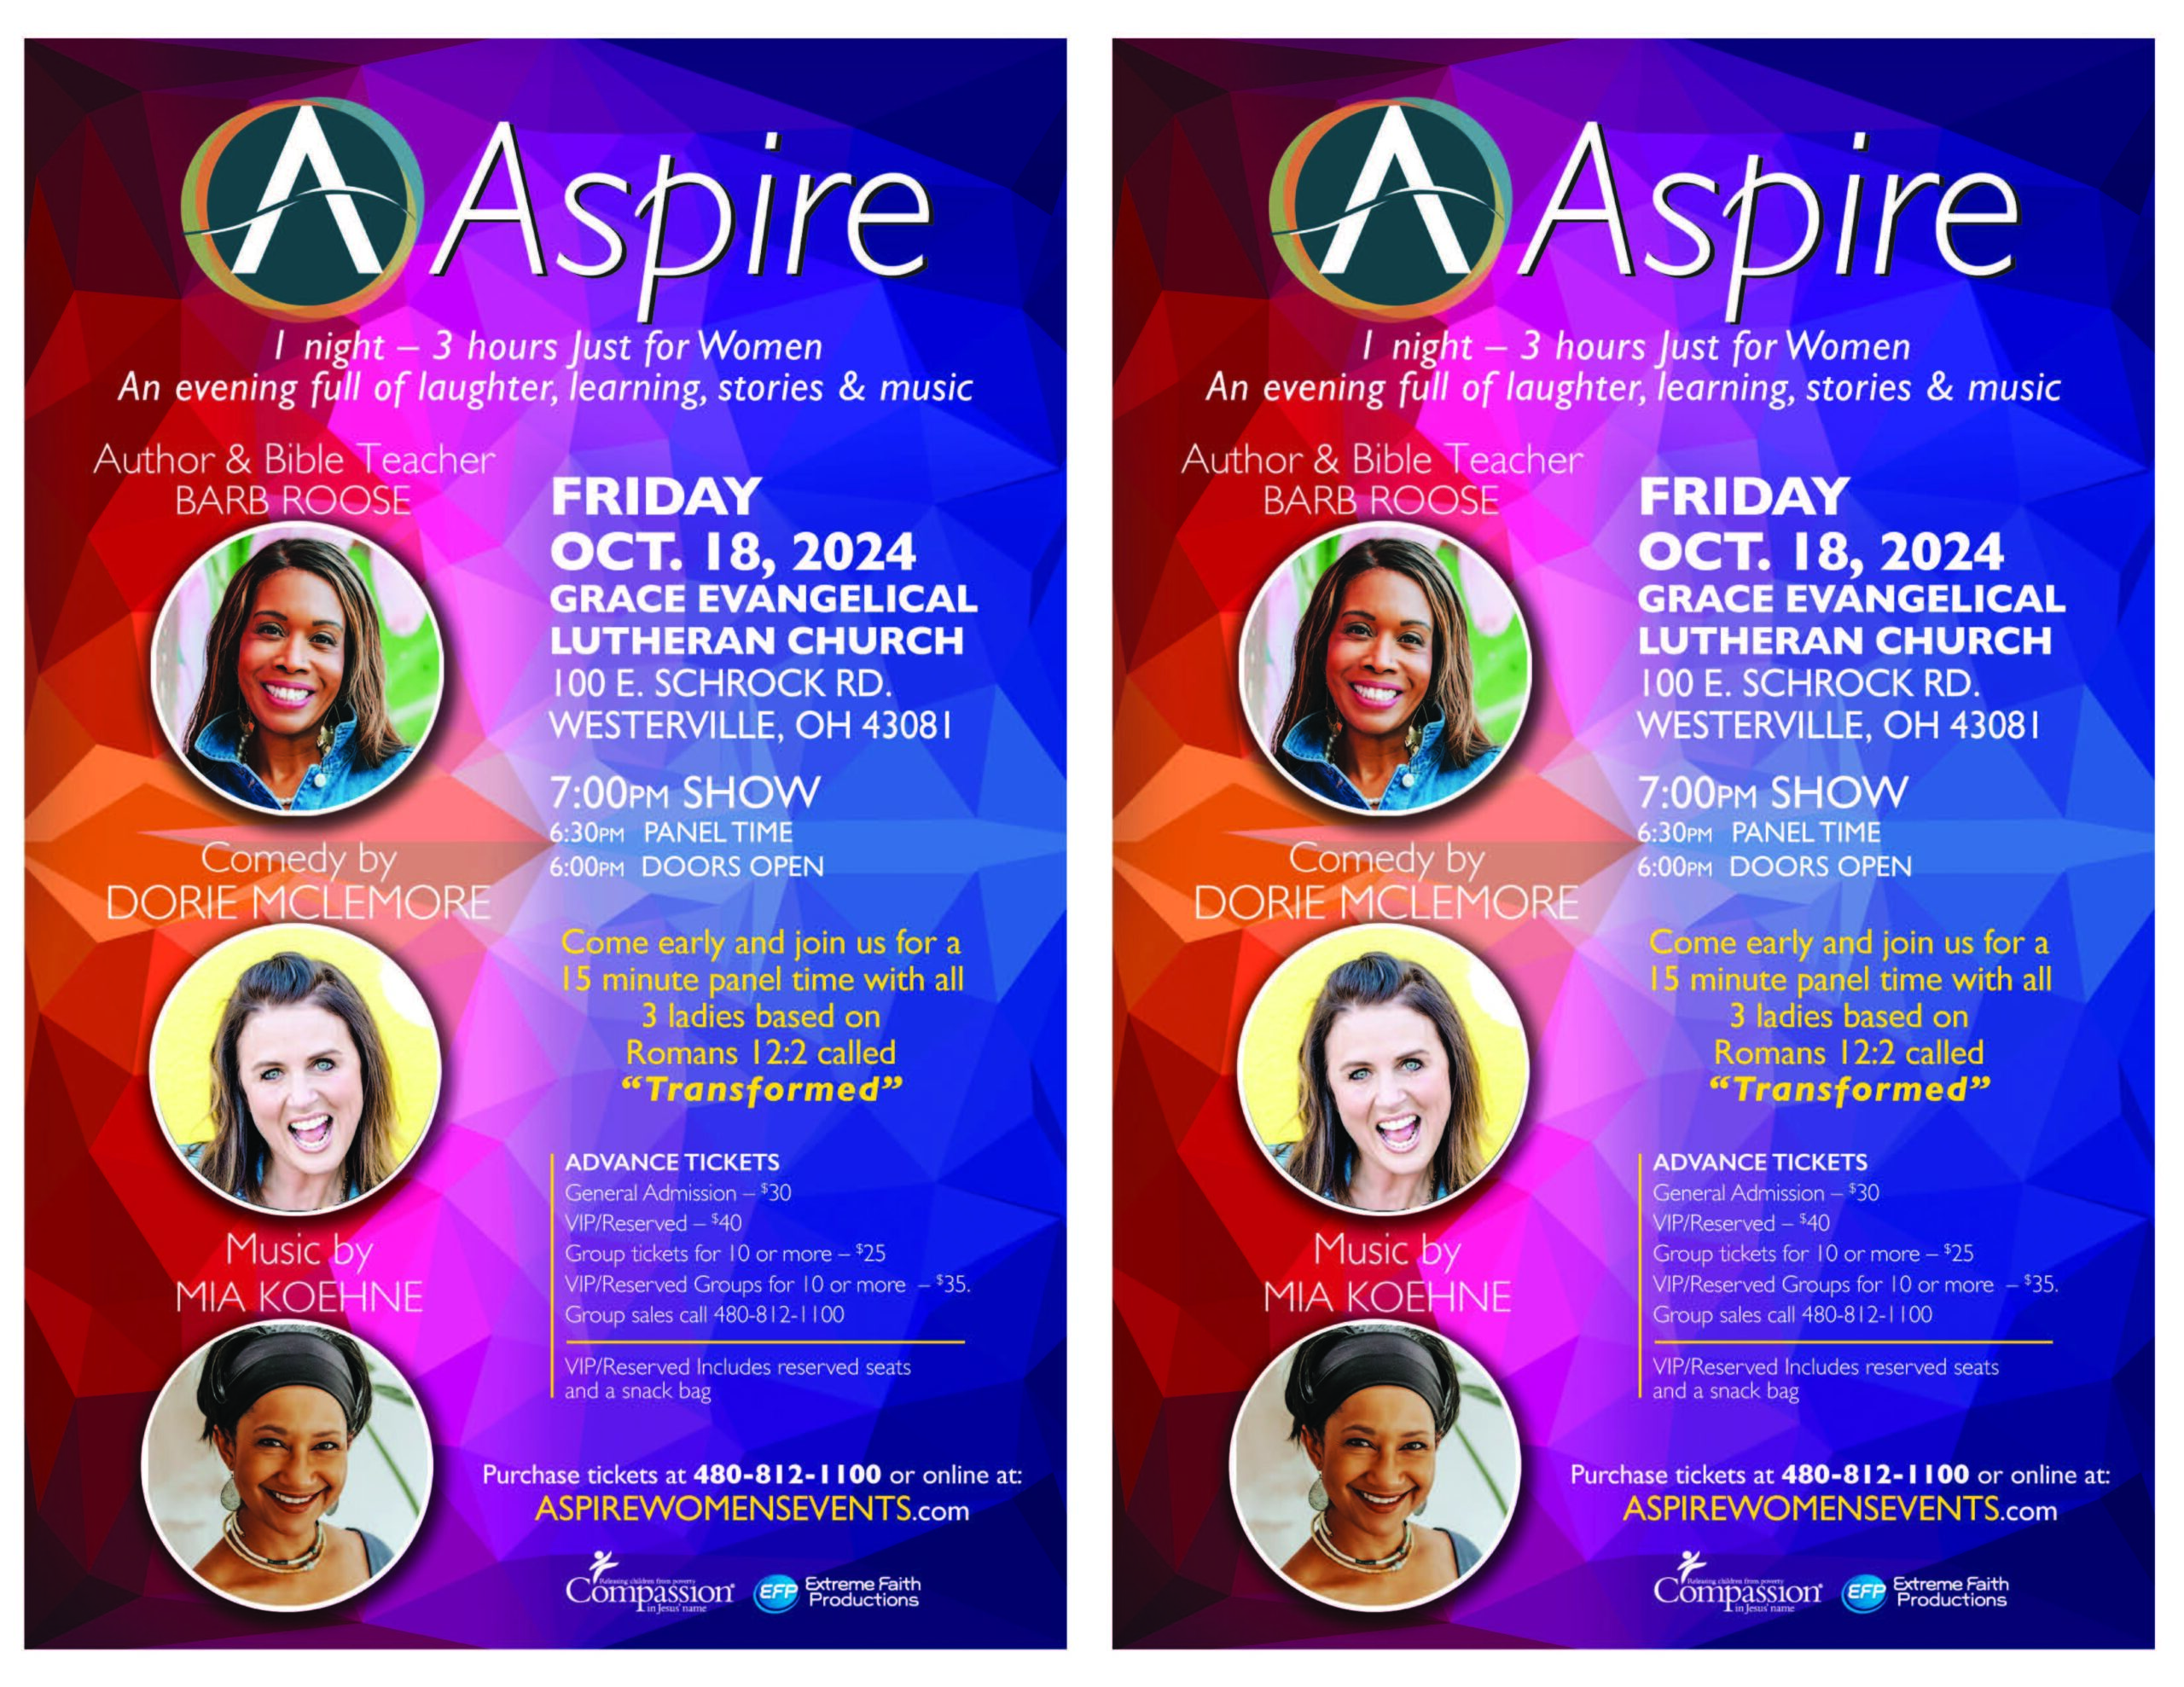 Aspire Fri Oct 18 Westerville OH 2UP